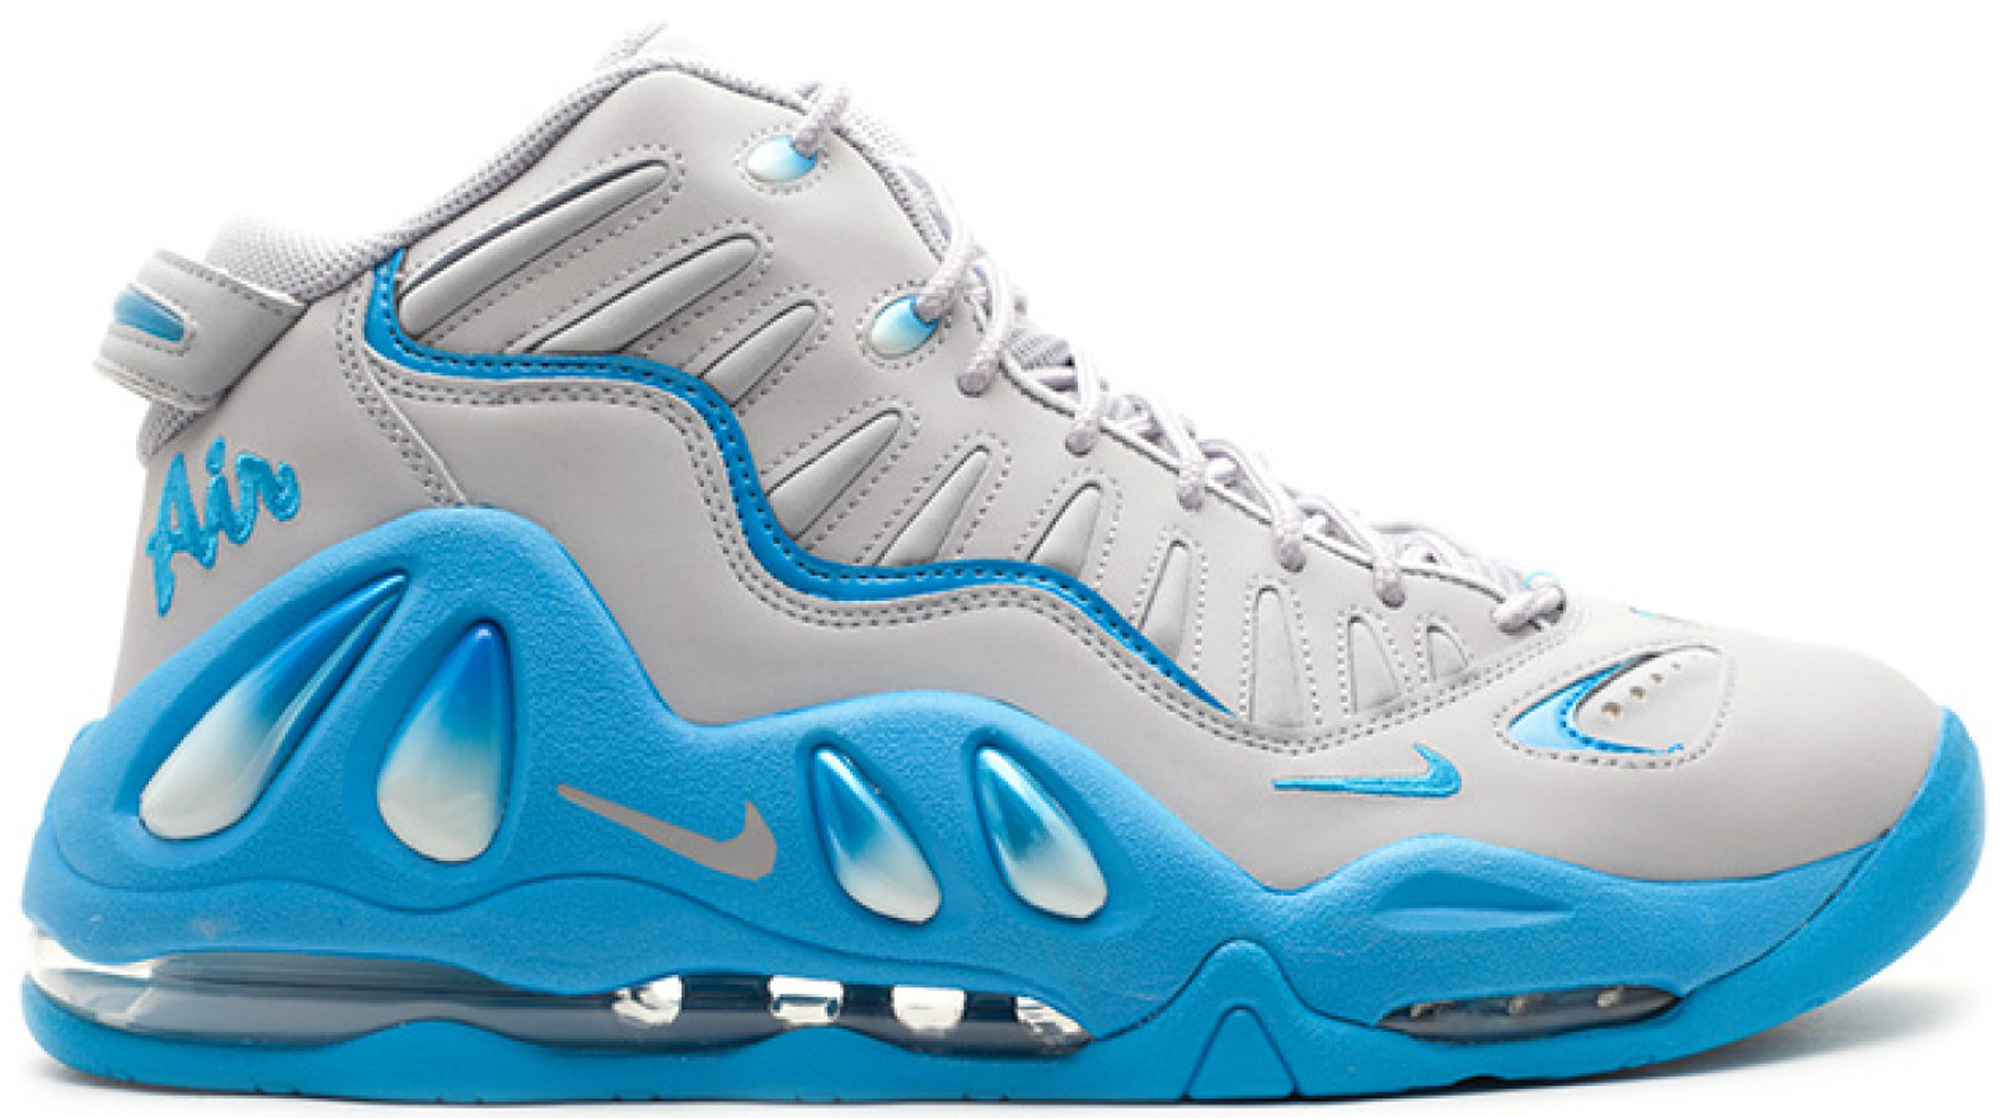 Nike Air Max Uptempo 97 Wolf Grey Orion 